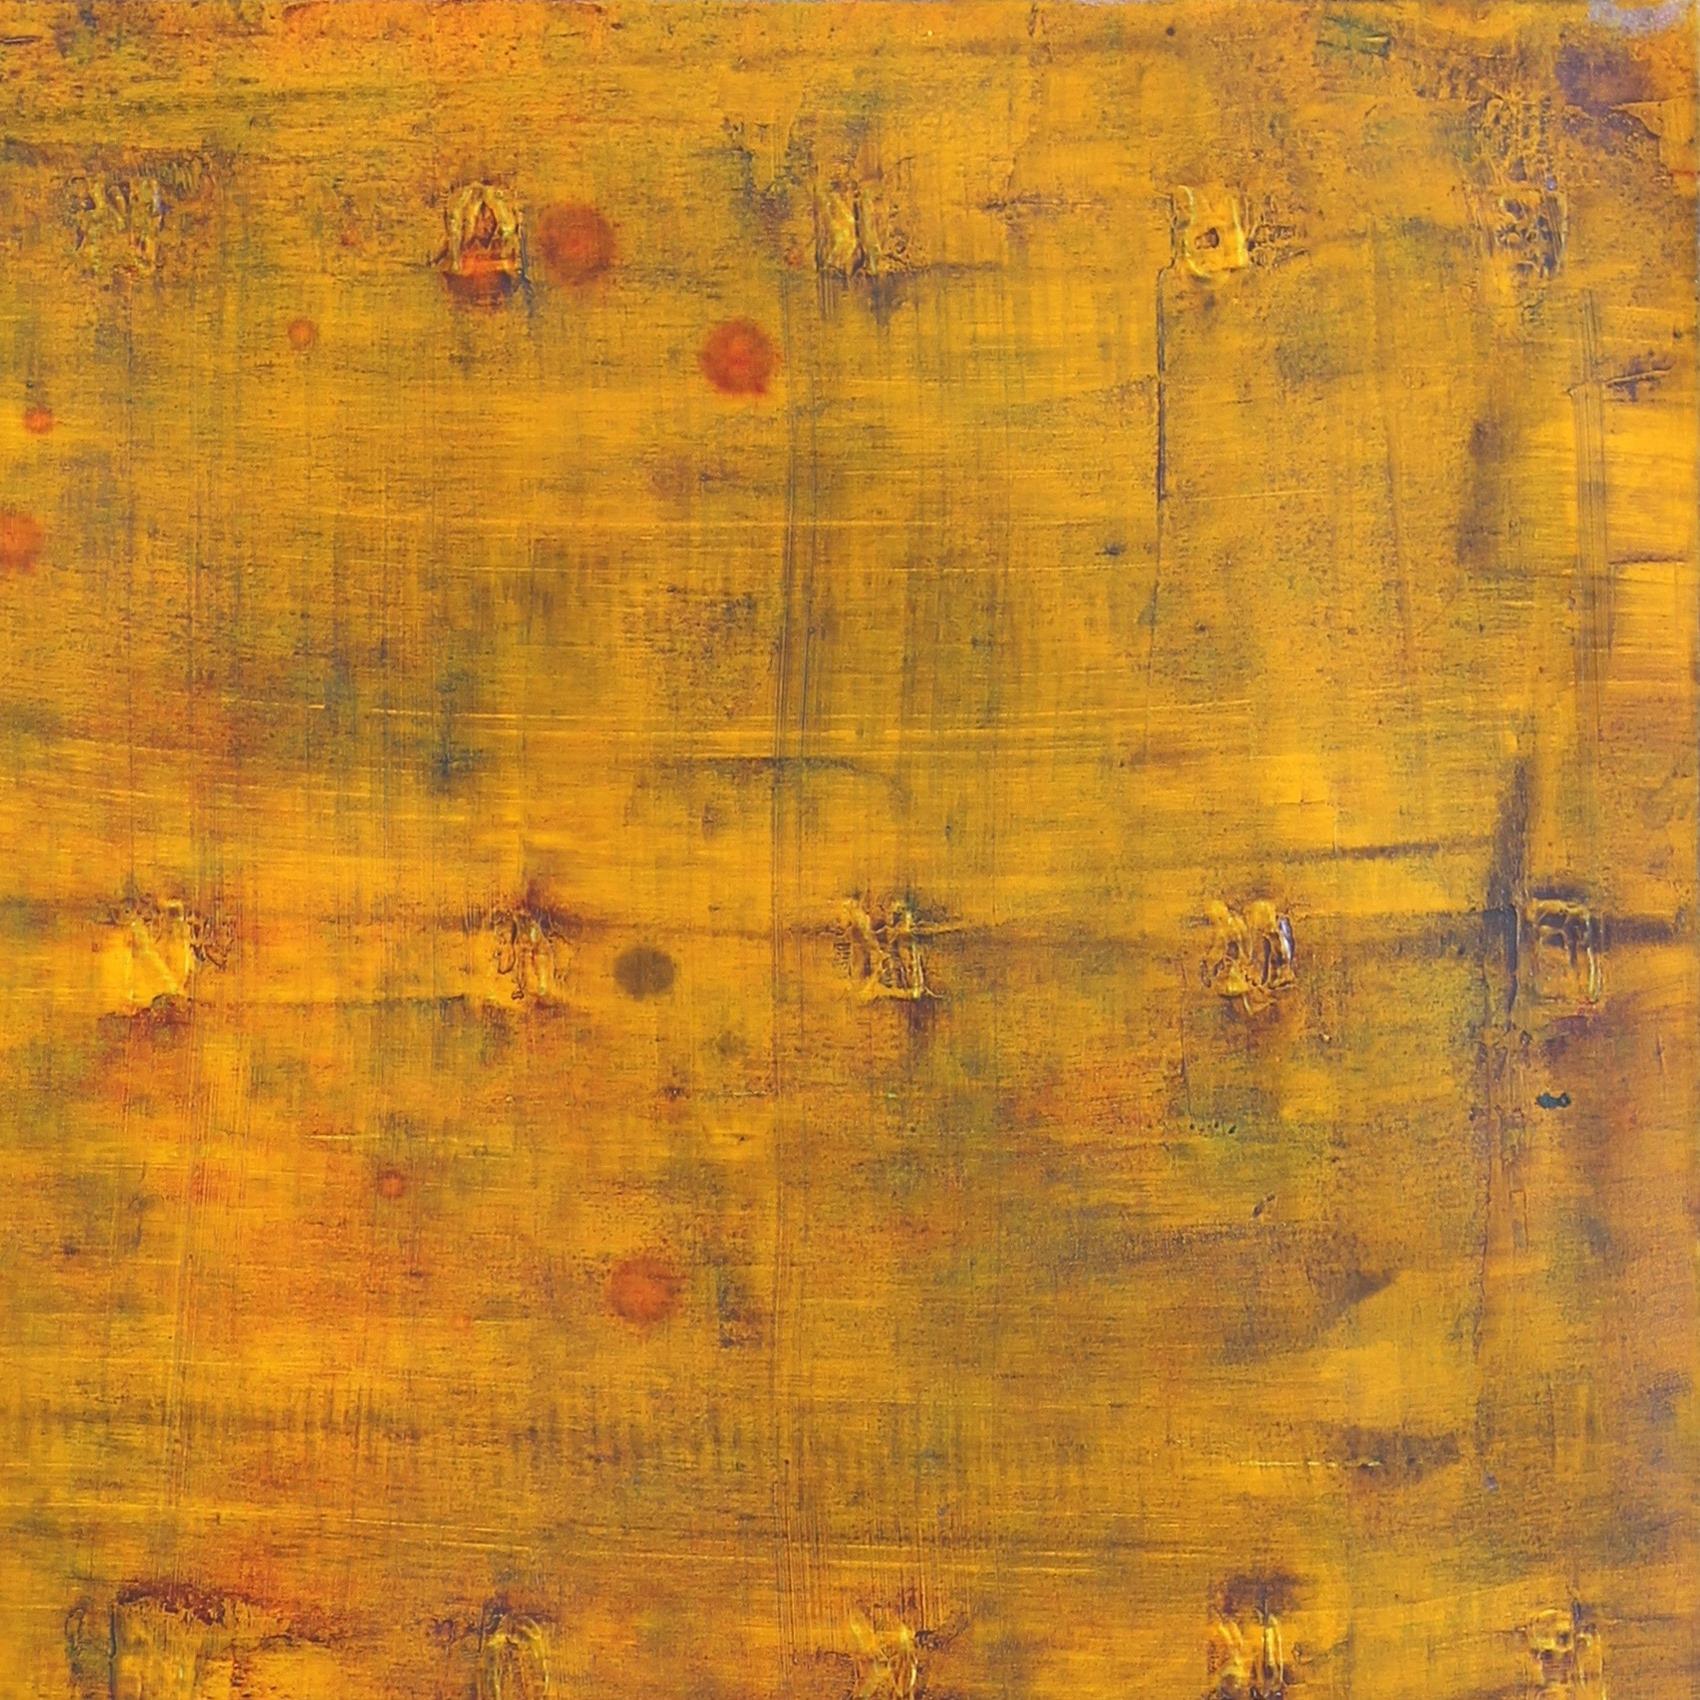 AWH 191 - Original Abstract Expressionist Yellow Colorfield Oil Painting - Minimalist Mixed Media Art by Bernhard Zimmer